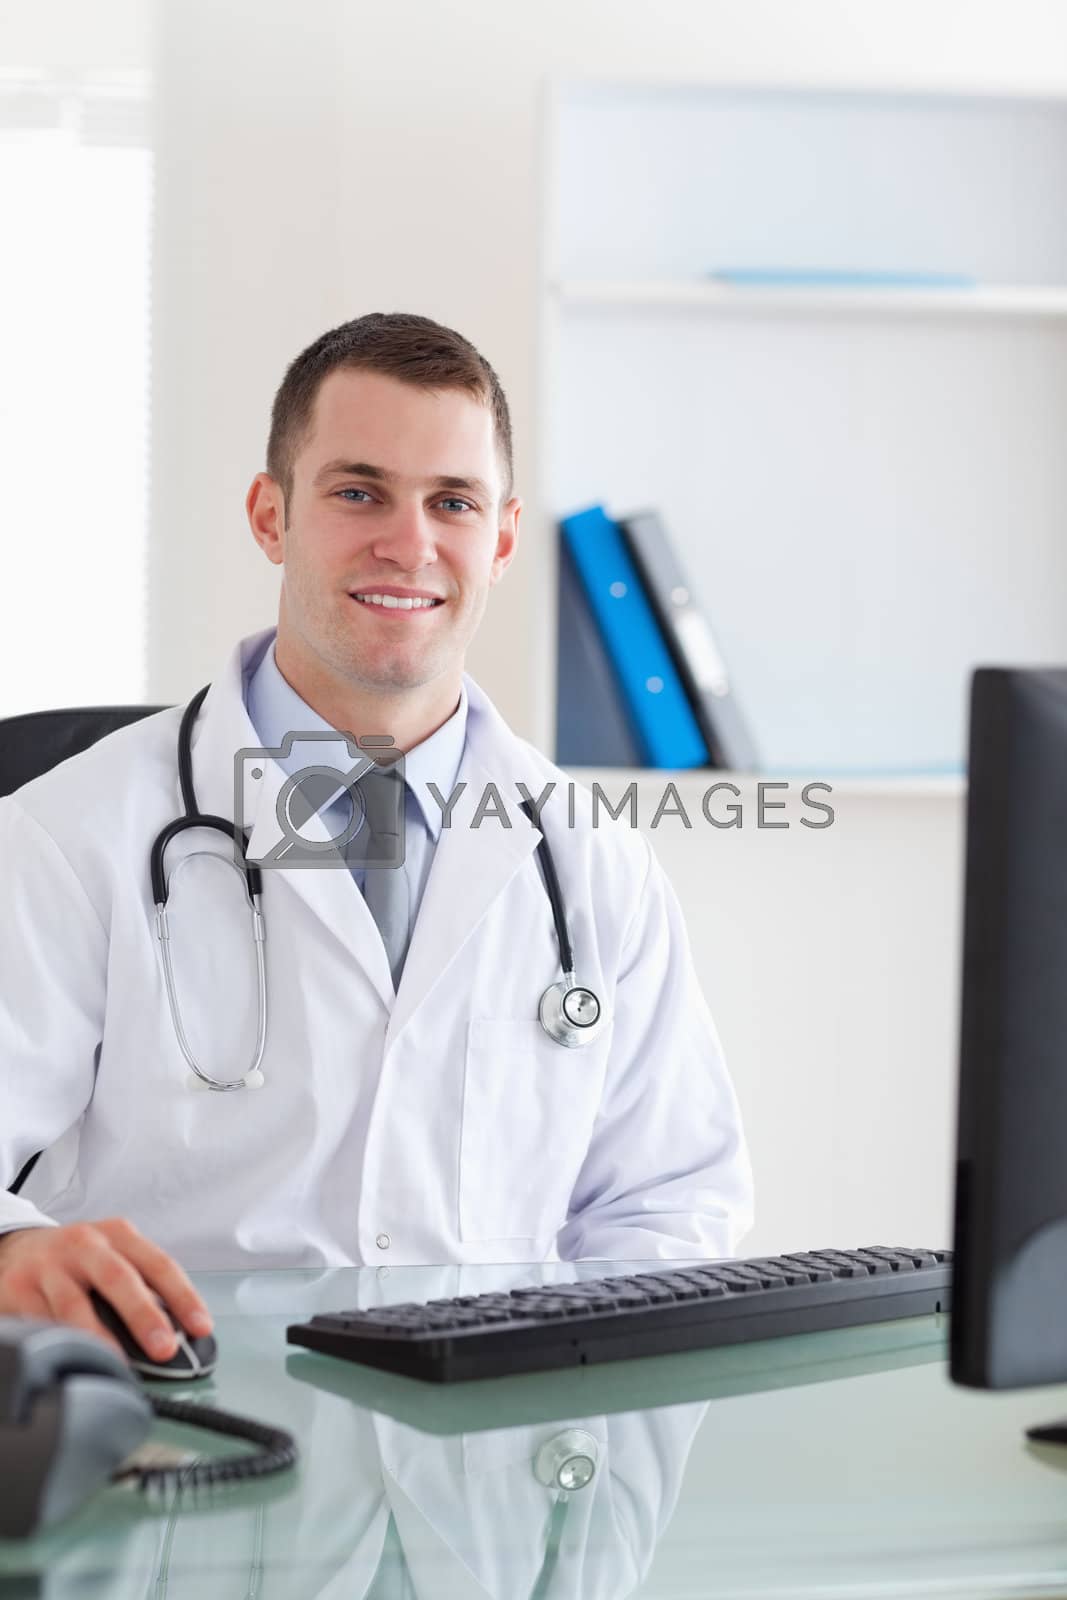 Royalty free image of Smiling doctor sitting on his computer by Wavebreakmedia